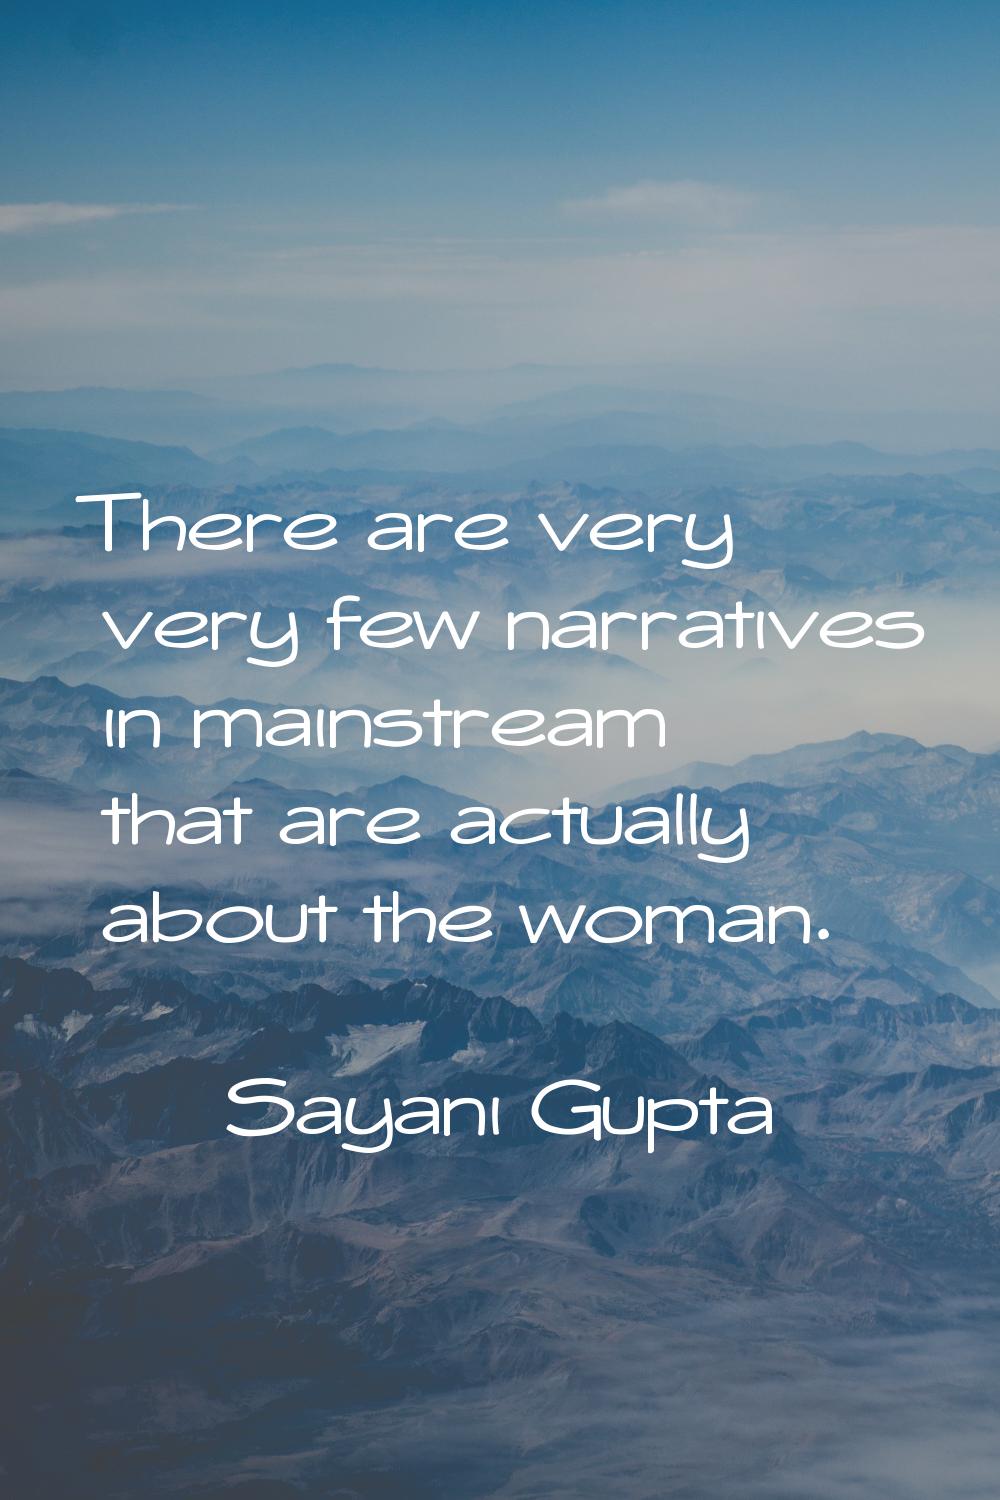 There are very very few narratives in mainstream that are actually about the woman.